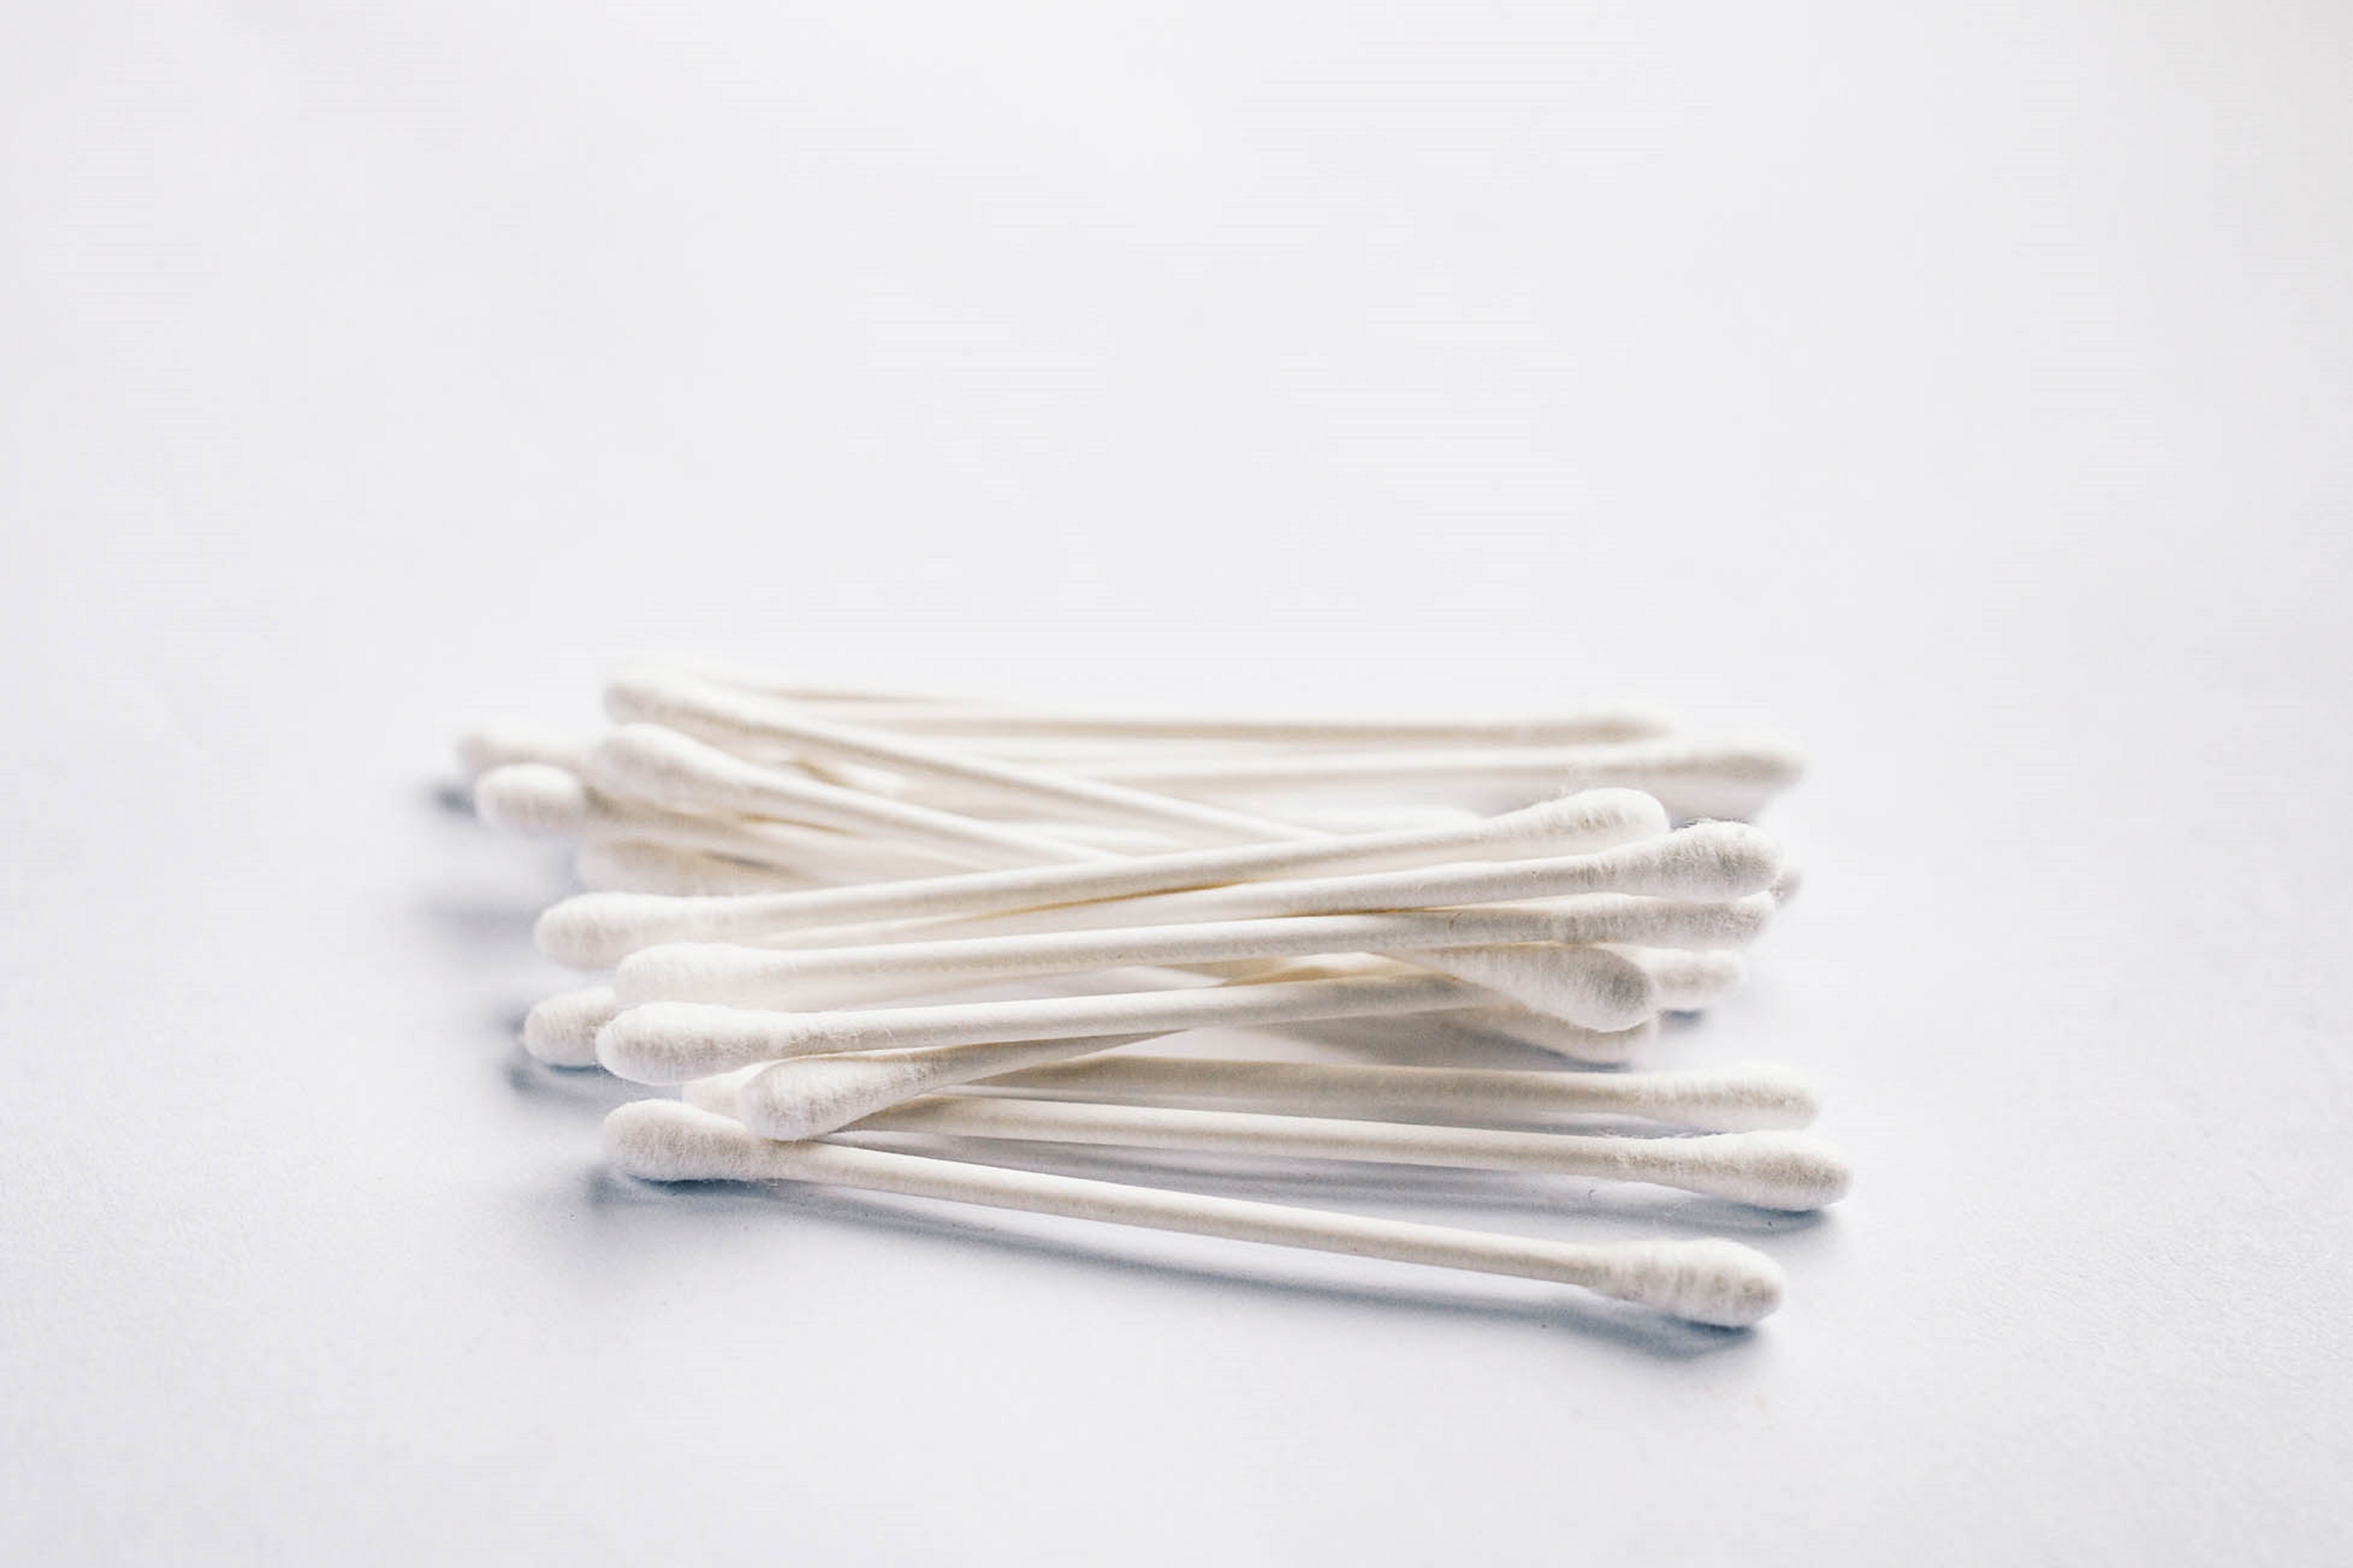 Close-up of Q-tips